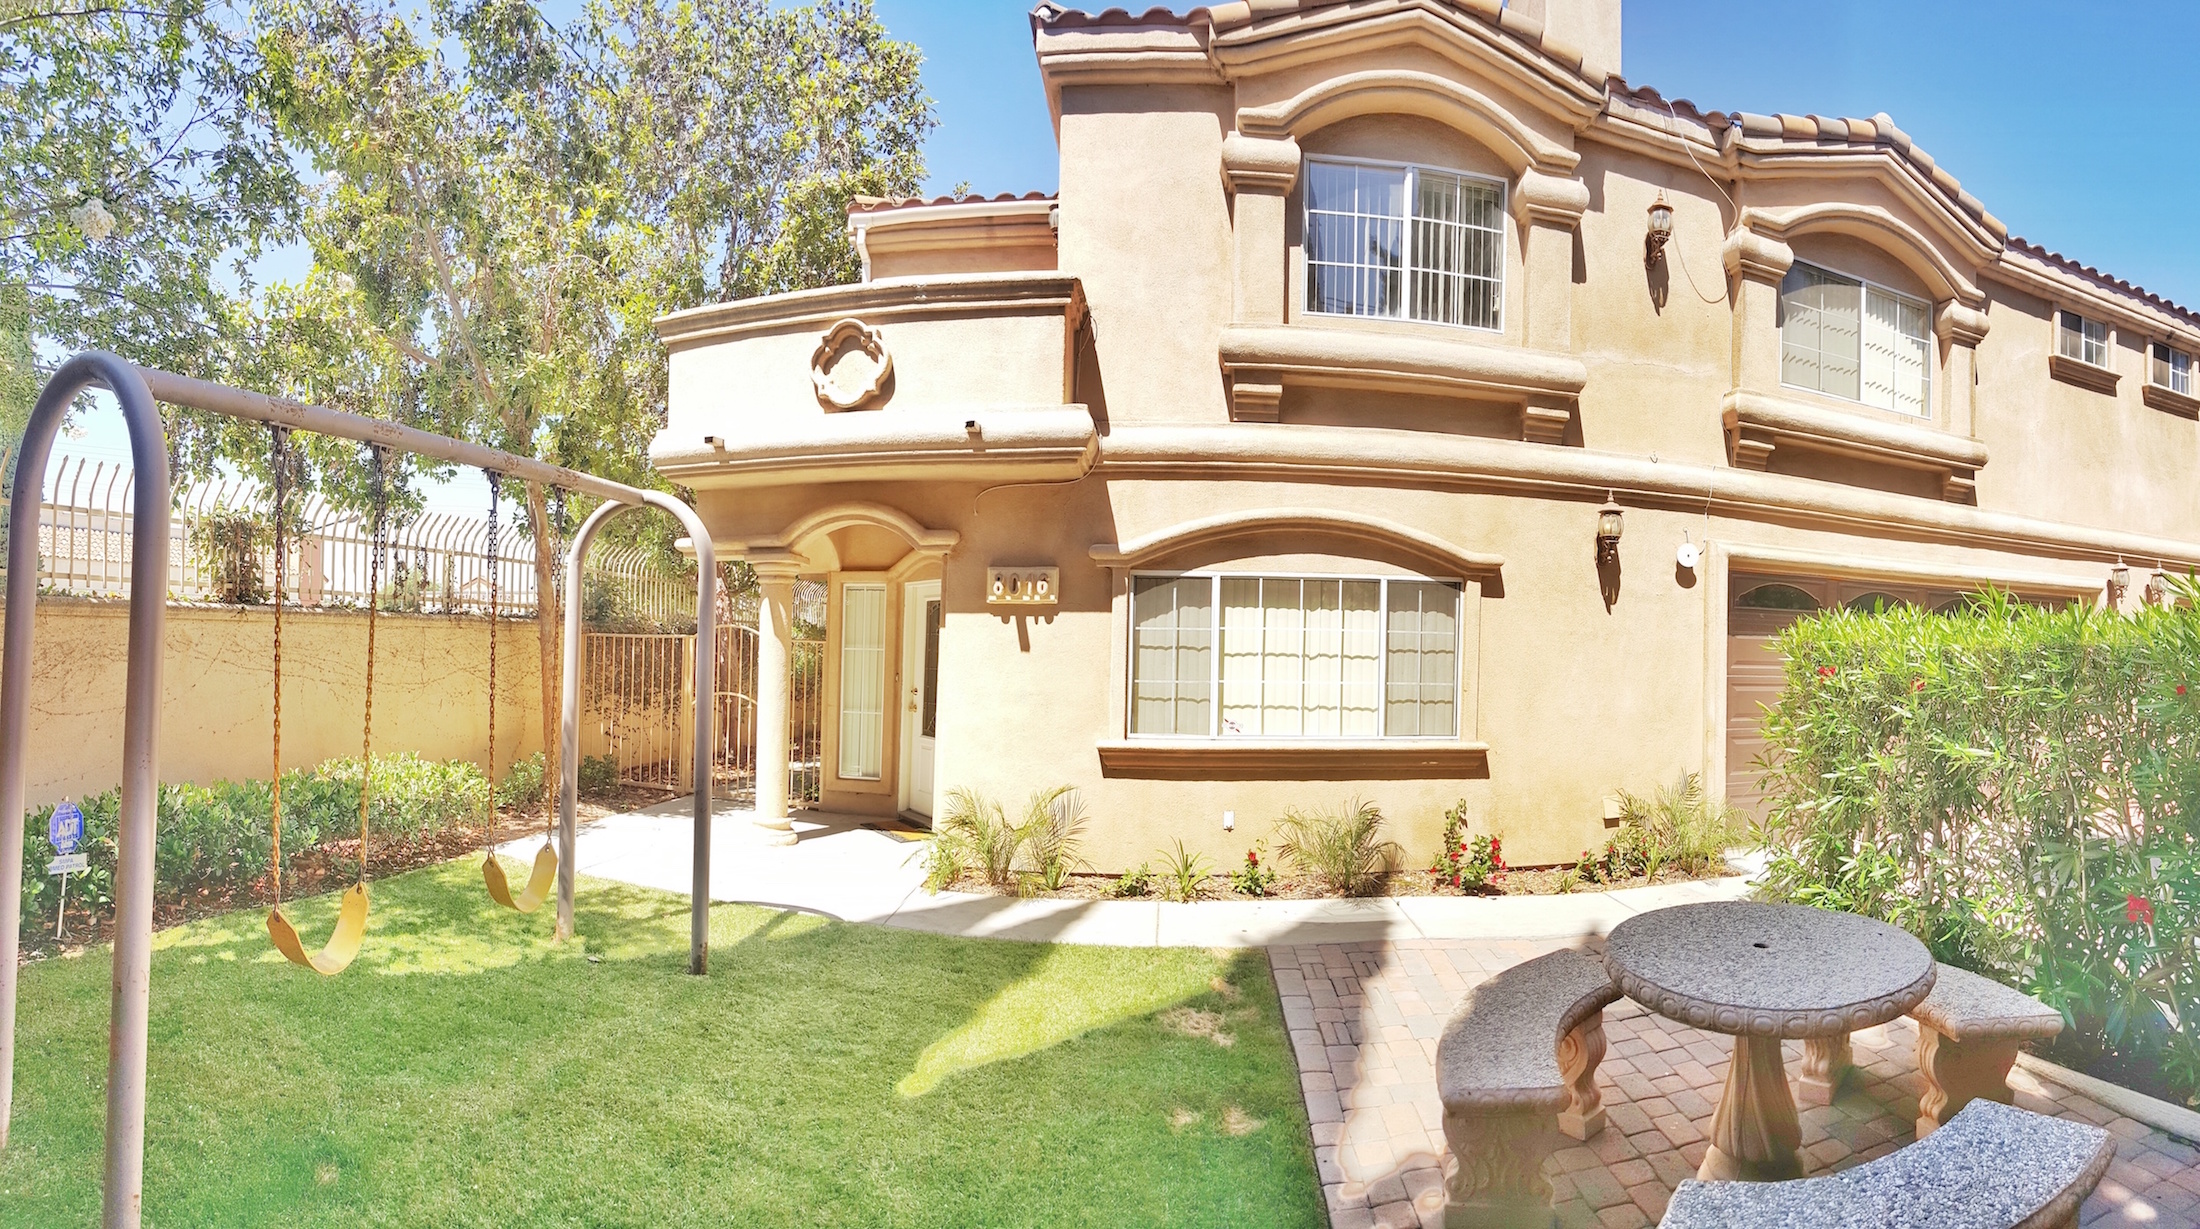 SOLD! 8016 Rose Street, Paramount CA | 4 BED 3 BATH | CONDO |1,824 SQ FT CLICK FOR MORE DETAILS